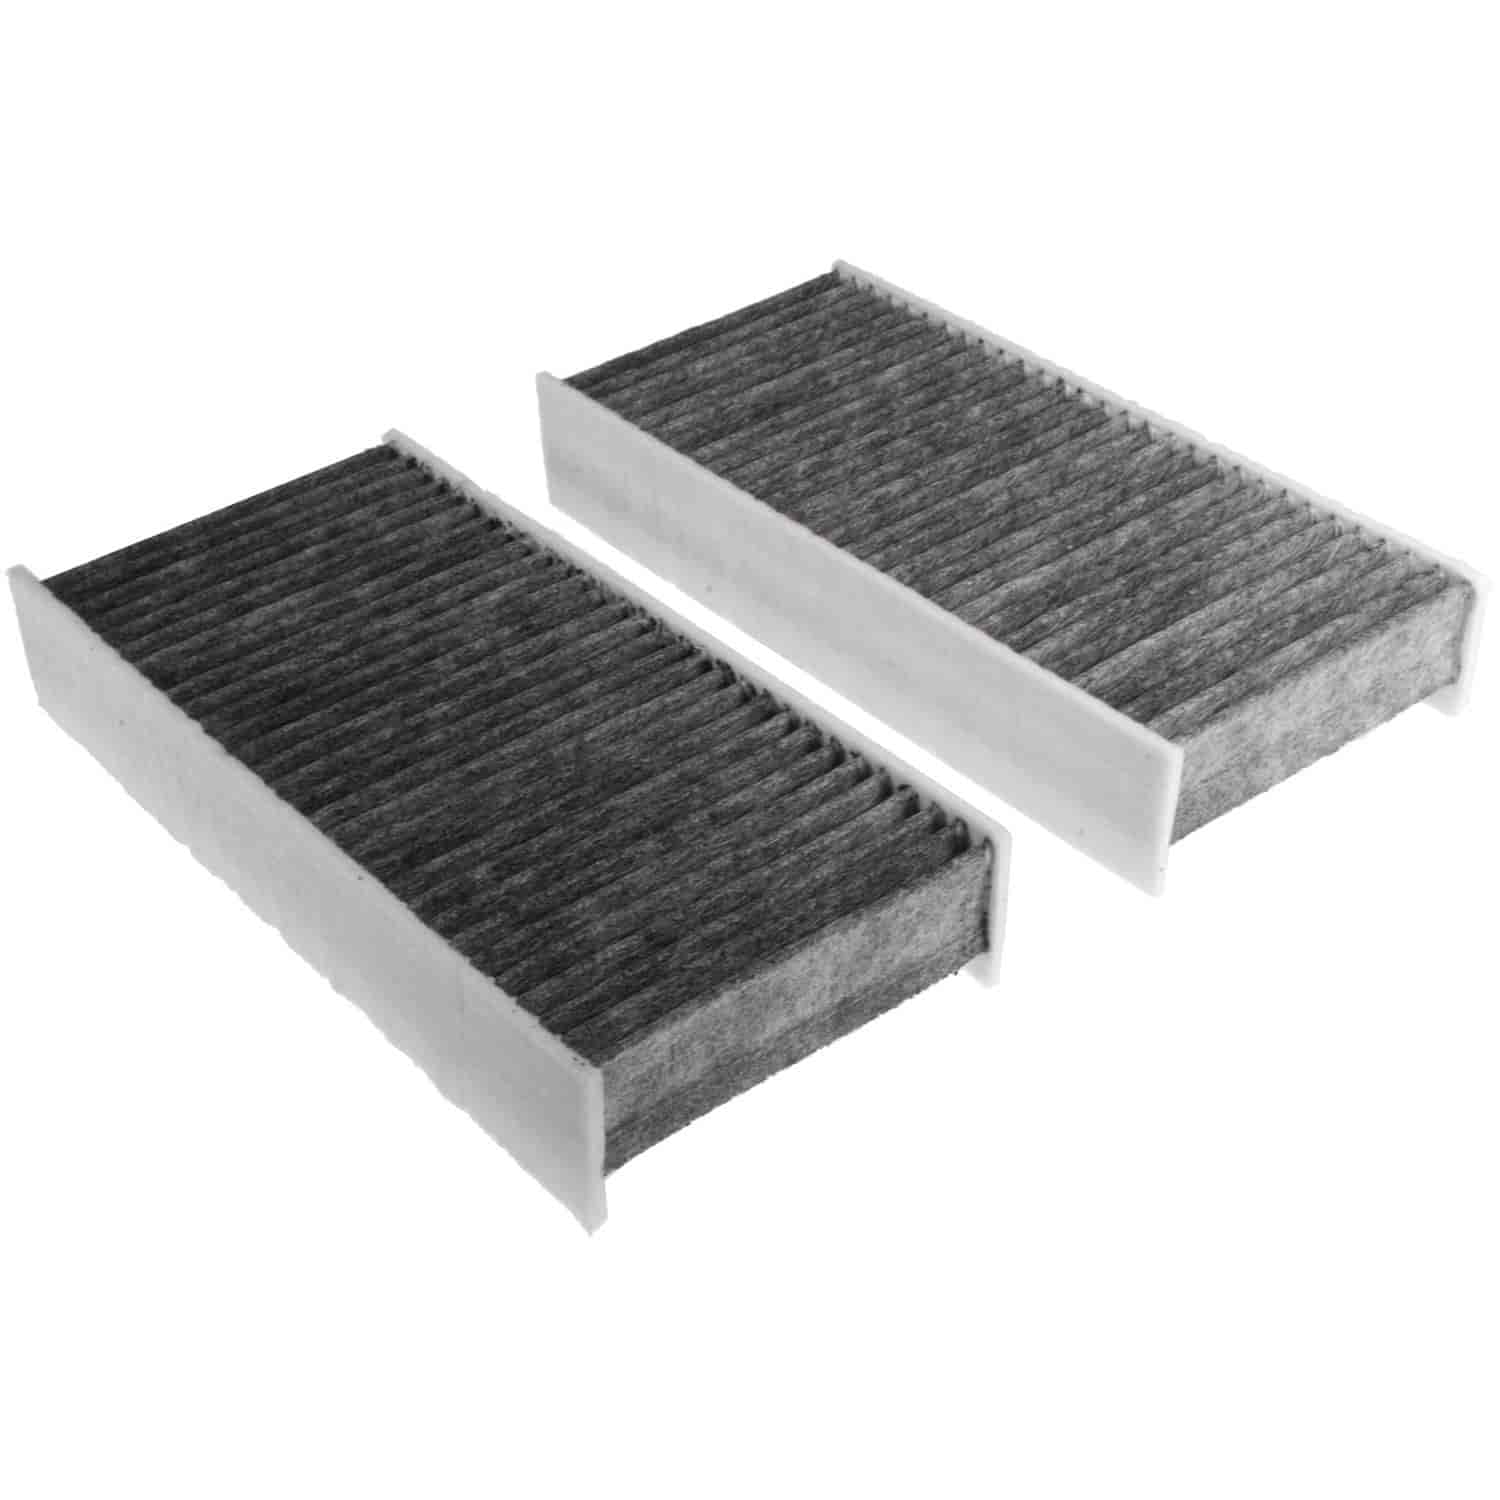 Mahle Cabin Air Filter Buick Rendezvous 2002-2007 Terraza 2005-2007 Chevrolet Uplander 2005-2008